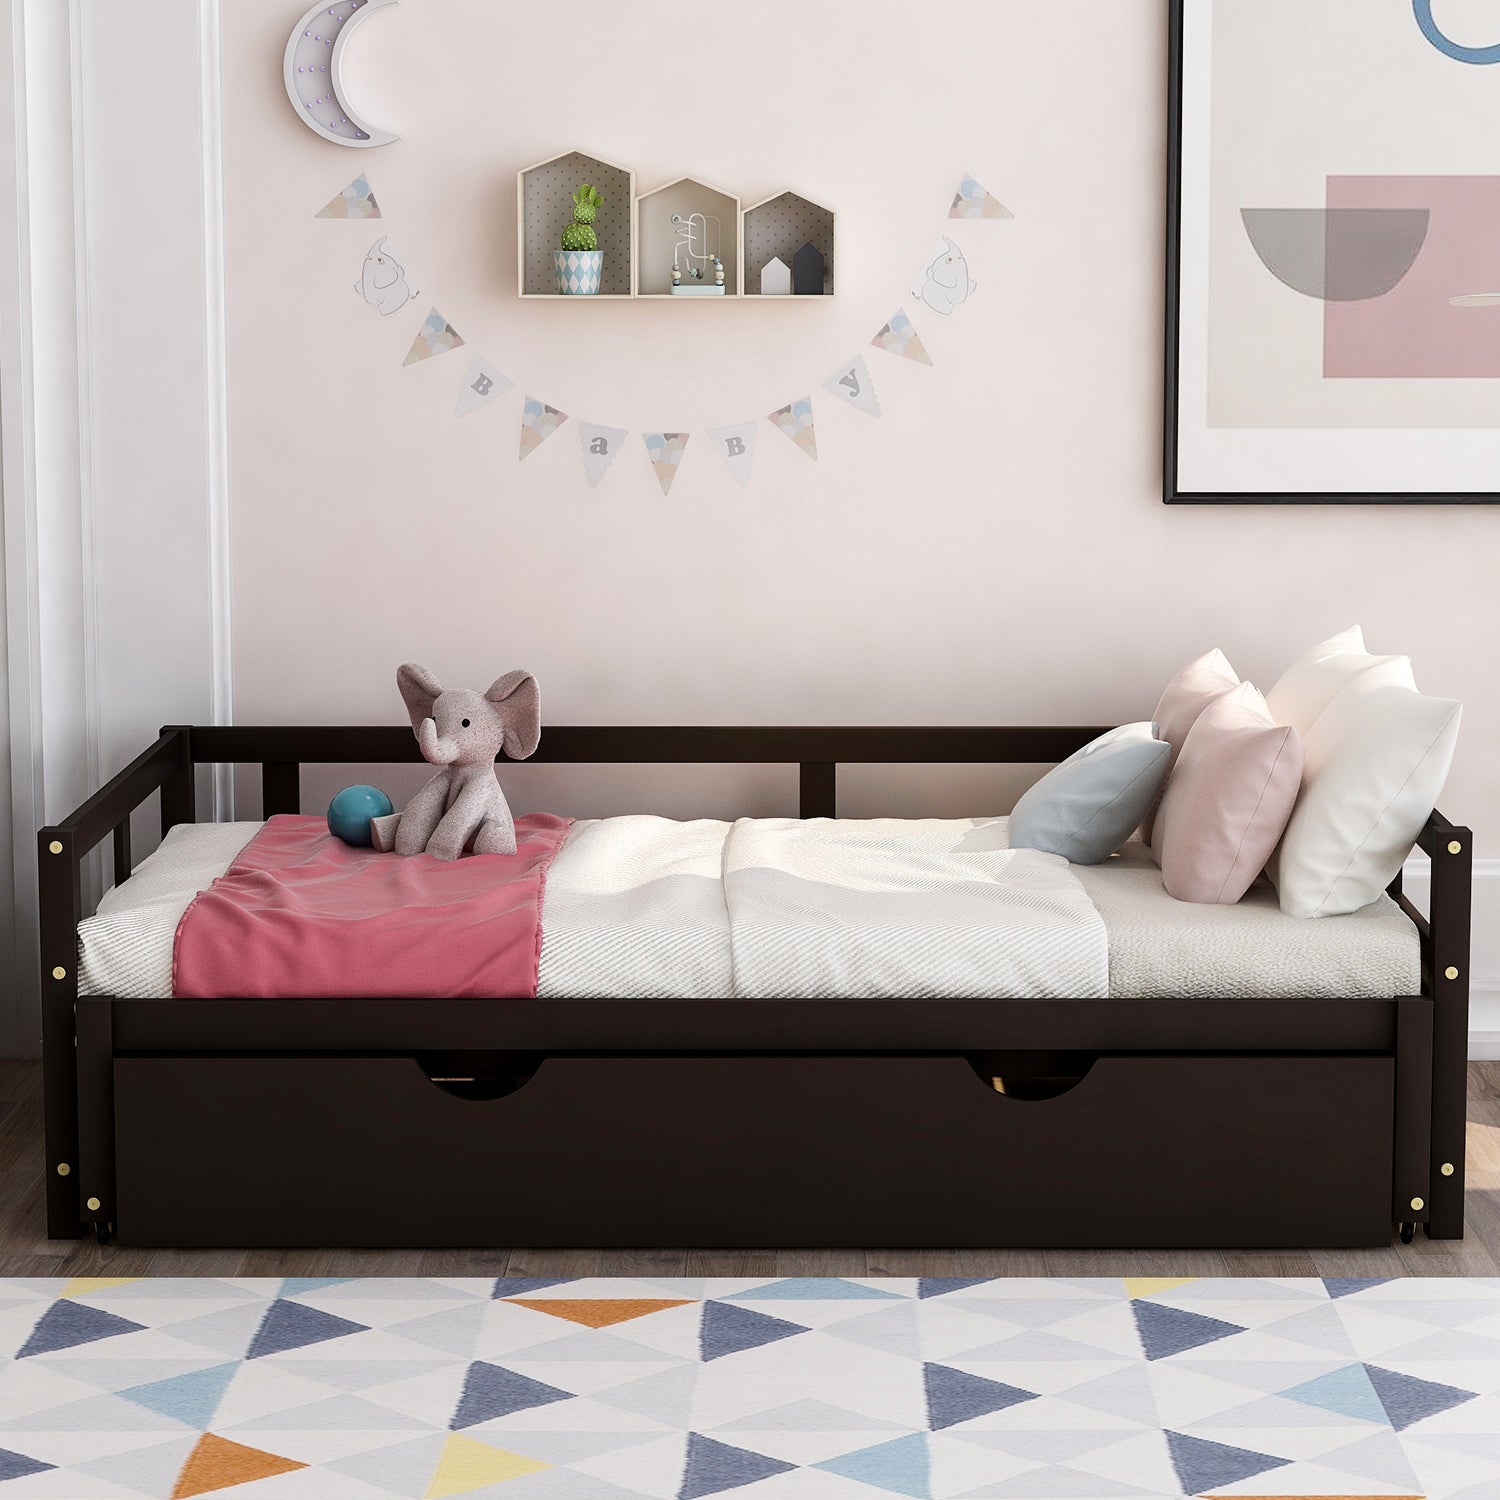 Extending Daybed with Trundle (Espresso)